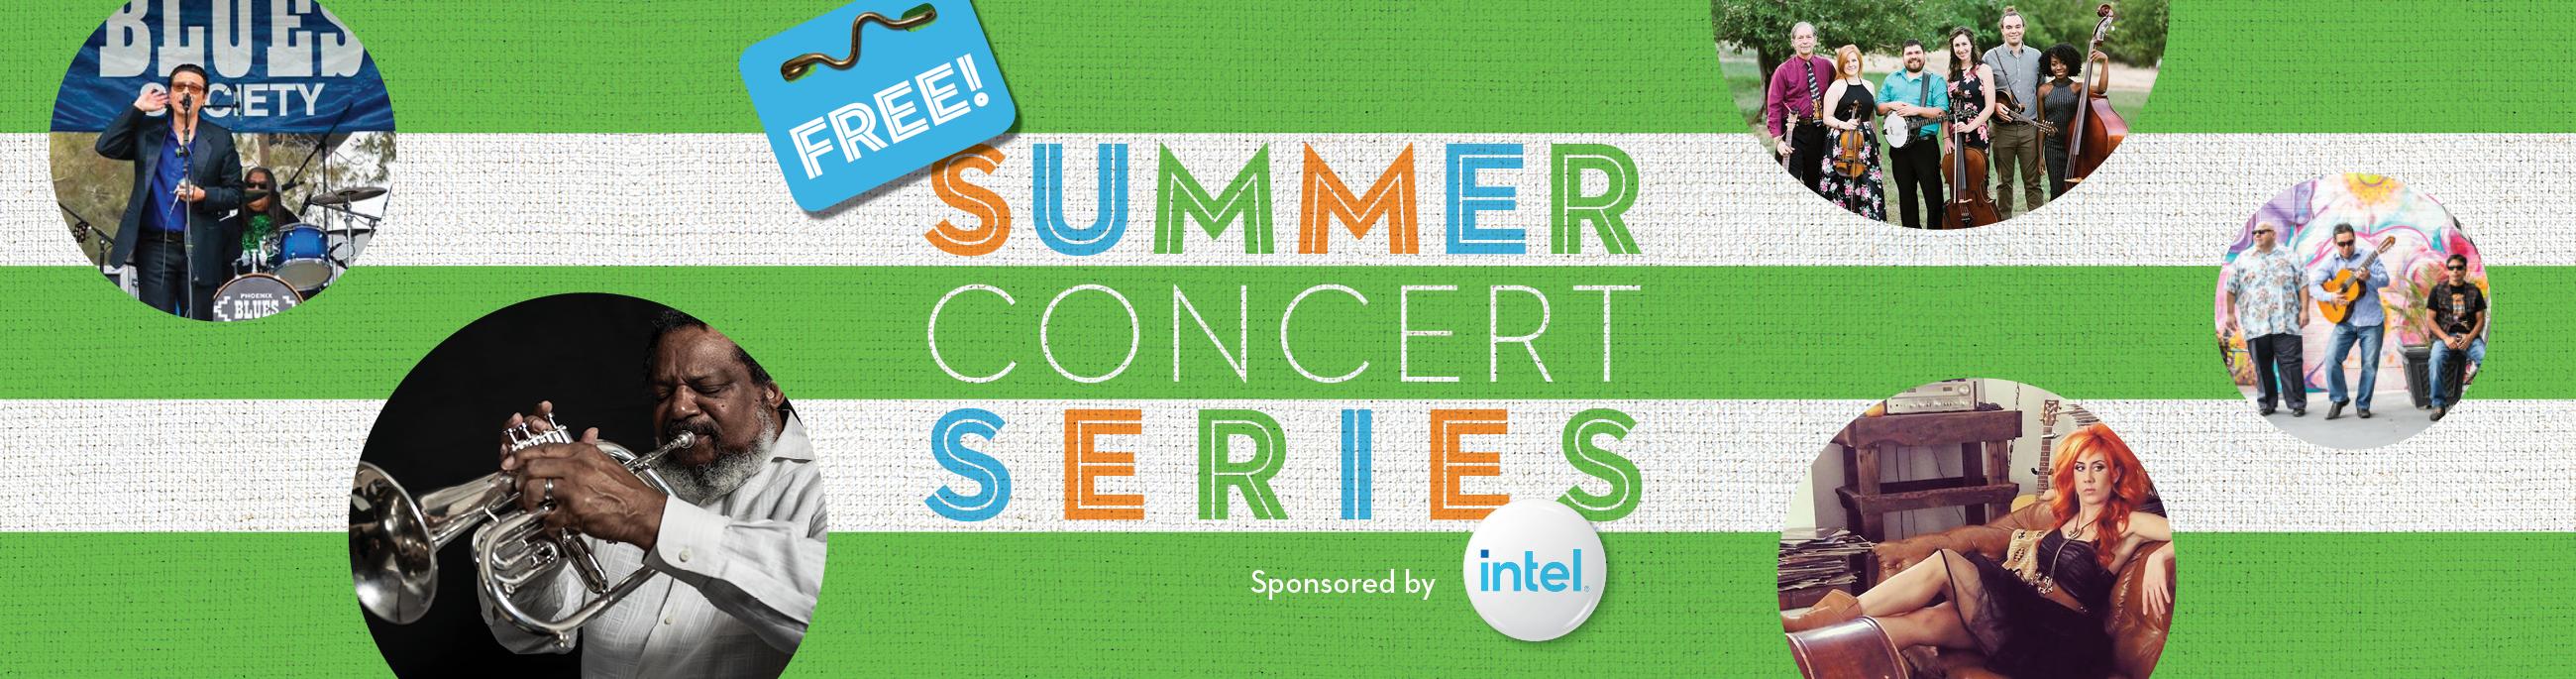 A green and white striped banner proclaims Free Summer Concert Series sponsored by Intel